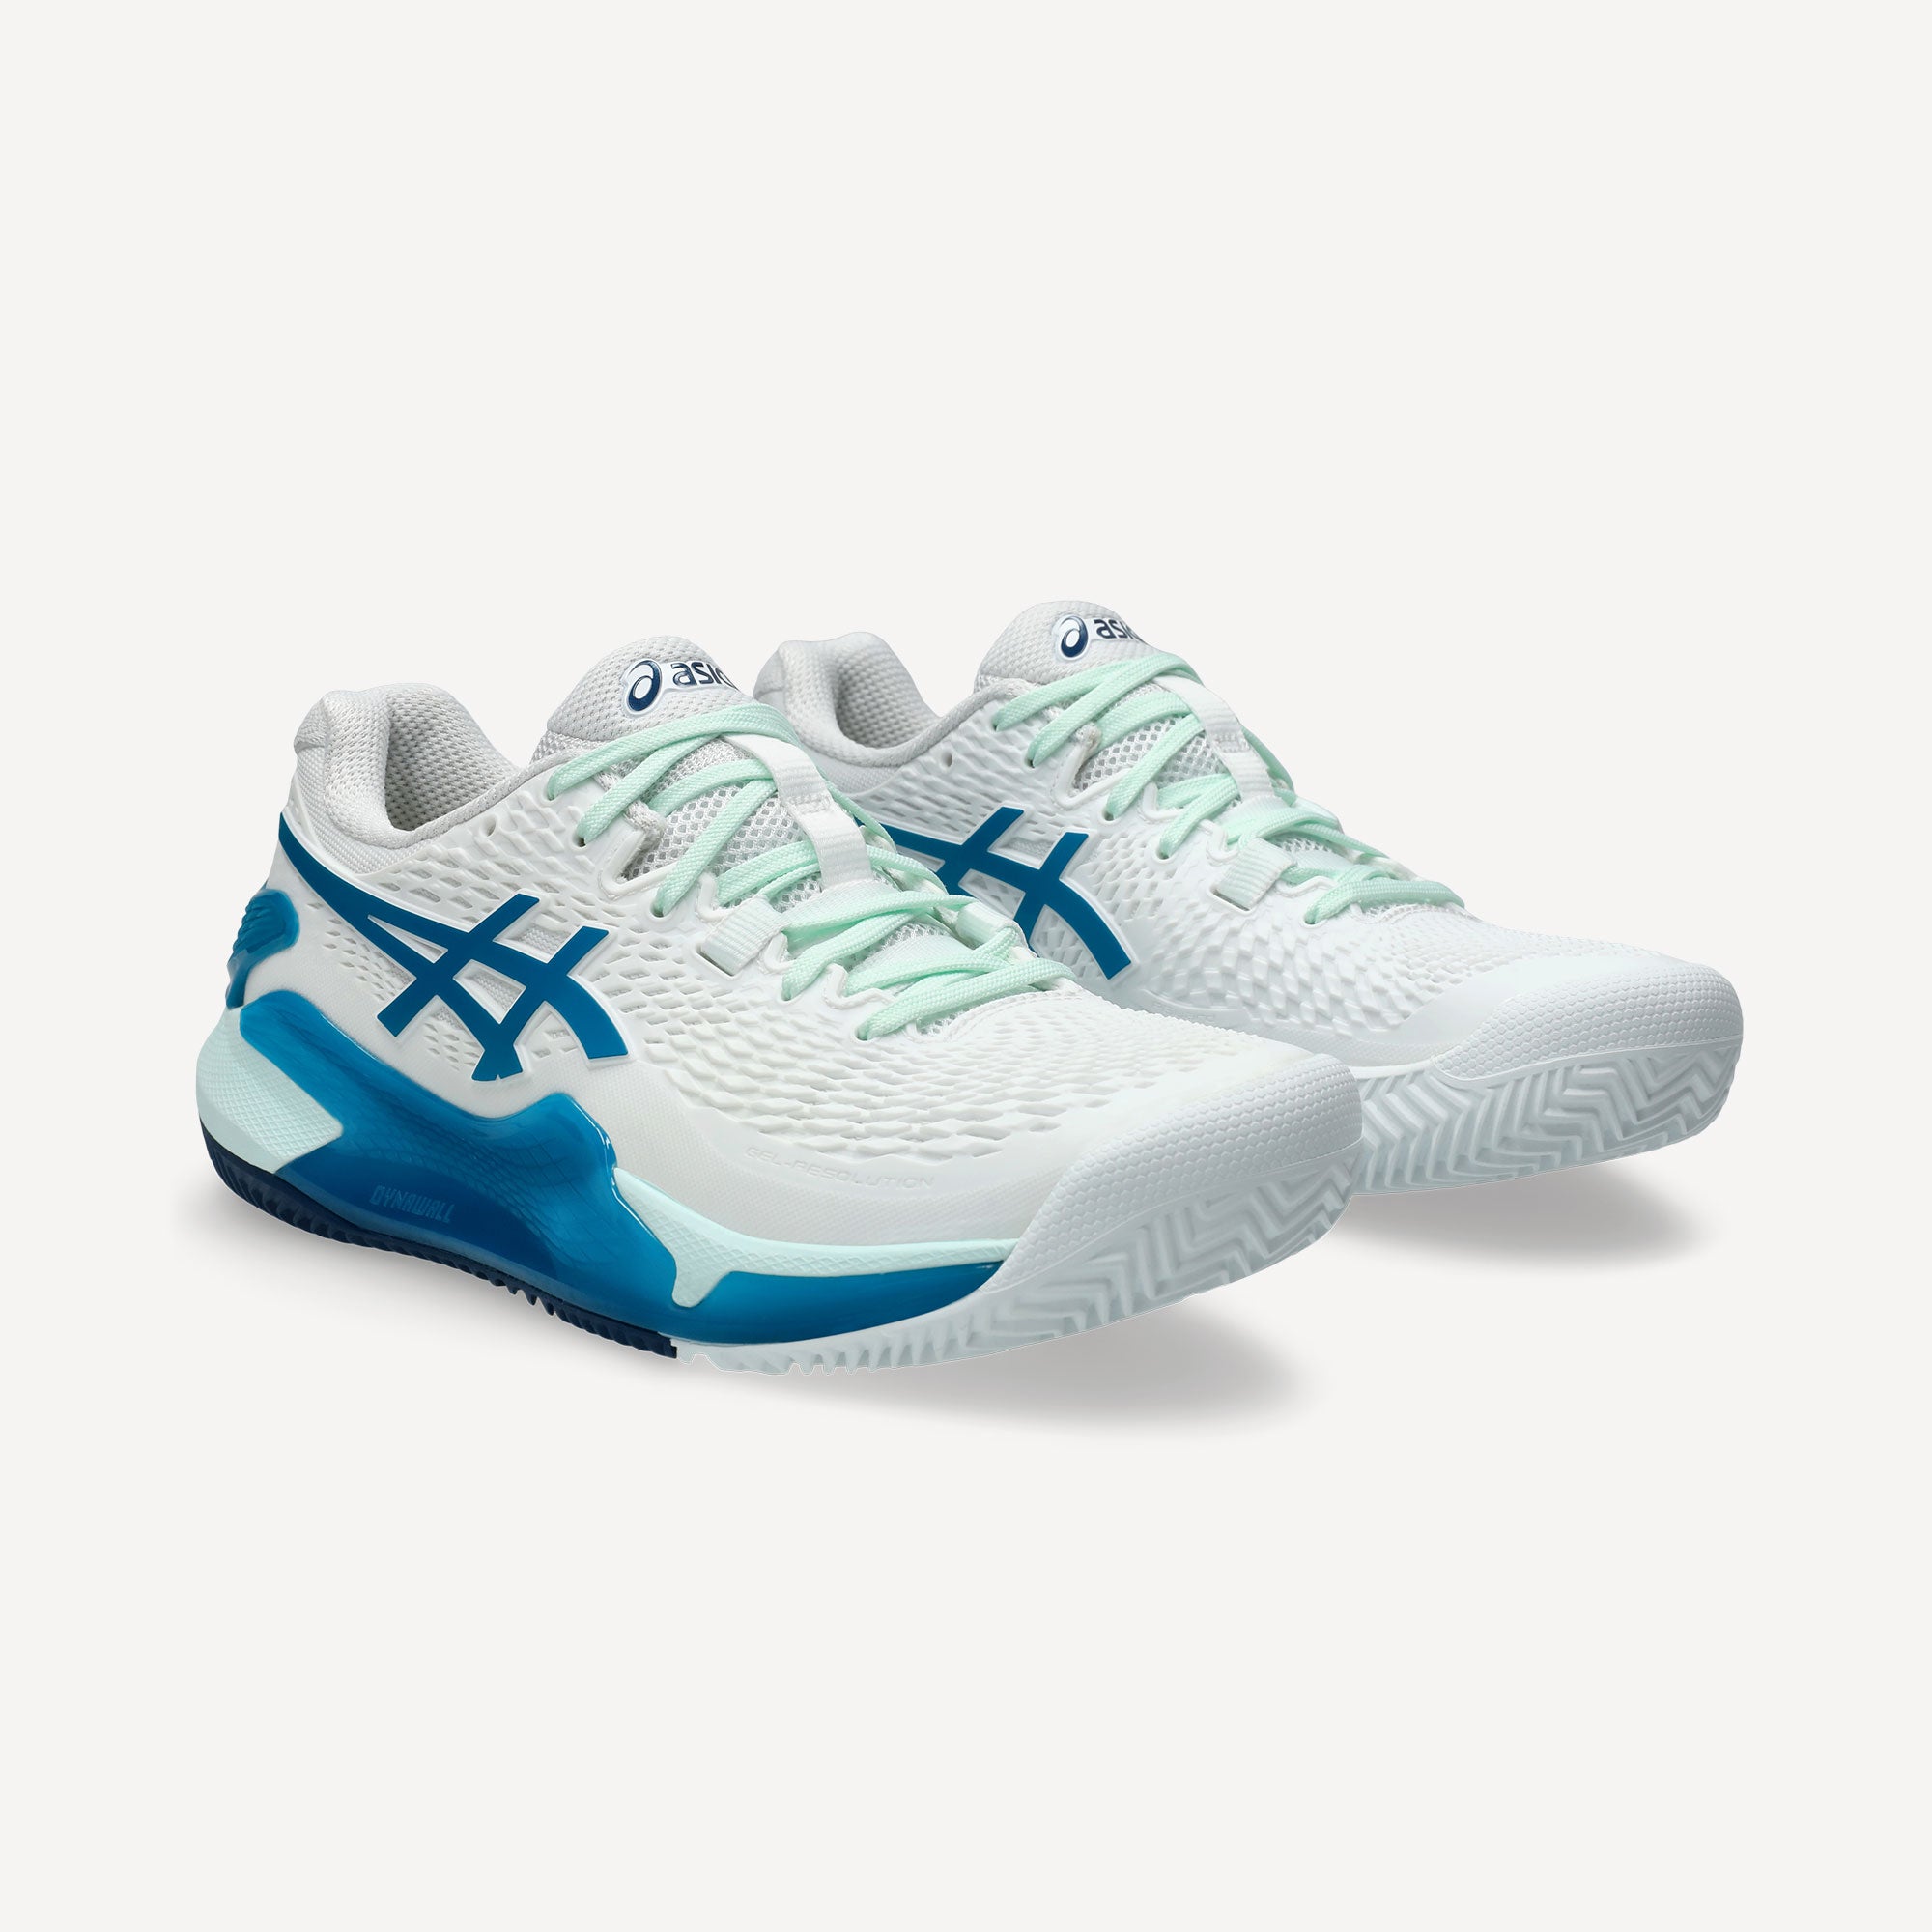 ASICS Gel-Resolution 9 Women's Clay Court Tennis Shoes - White (4)